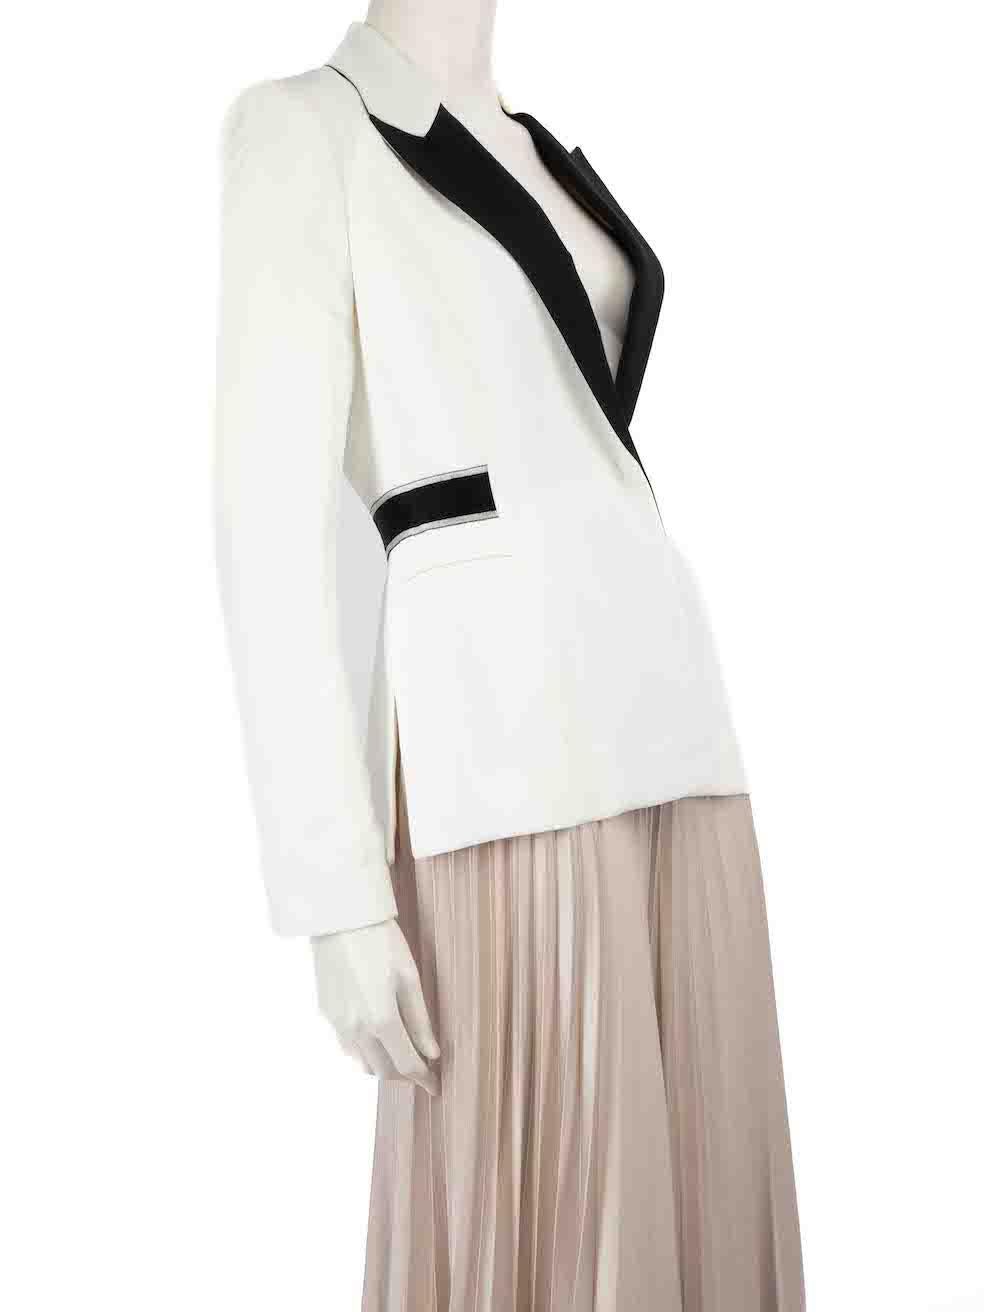 CONDITION is Good. General wear to blazer is evident. Moderate signs of wear to exterior fabric, with discolouration to lapel edge around neck, shoulder seams, cuff edges and hem on this used sample Amanda Wakeley designer resale item.
 
 
 
